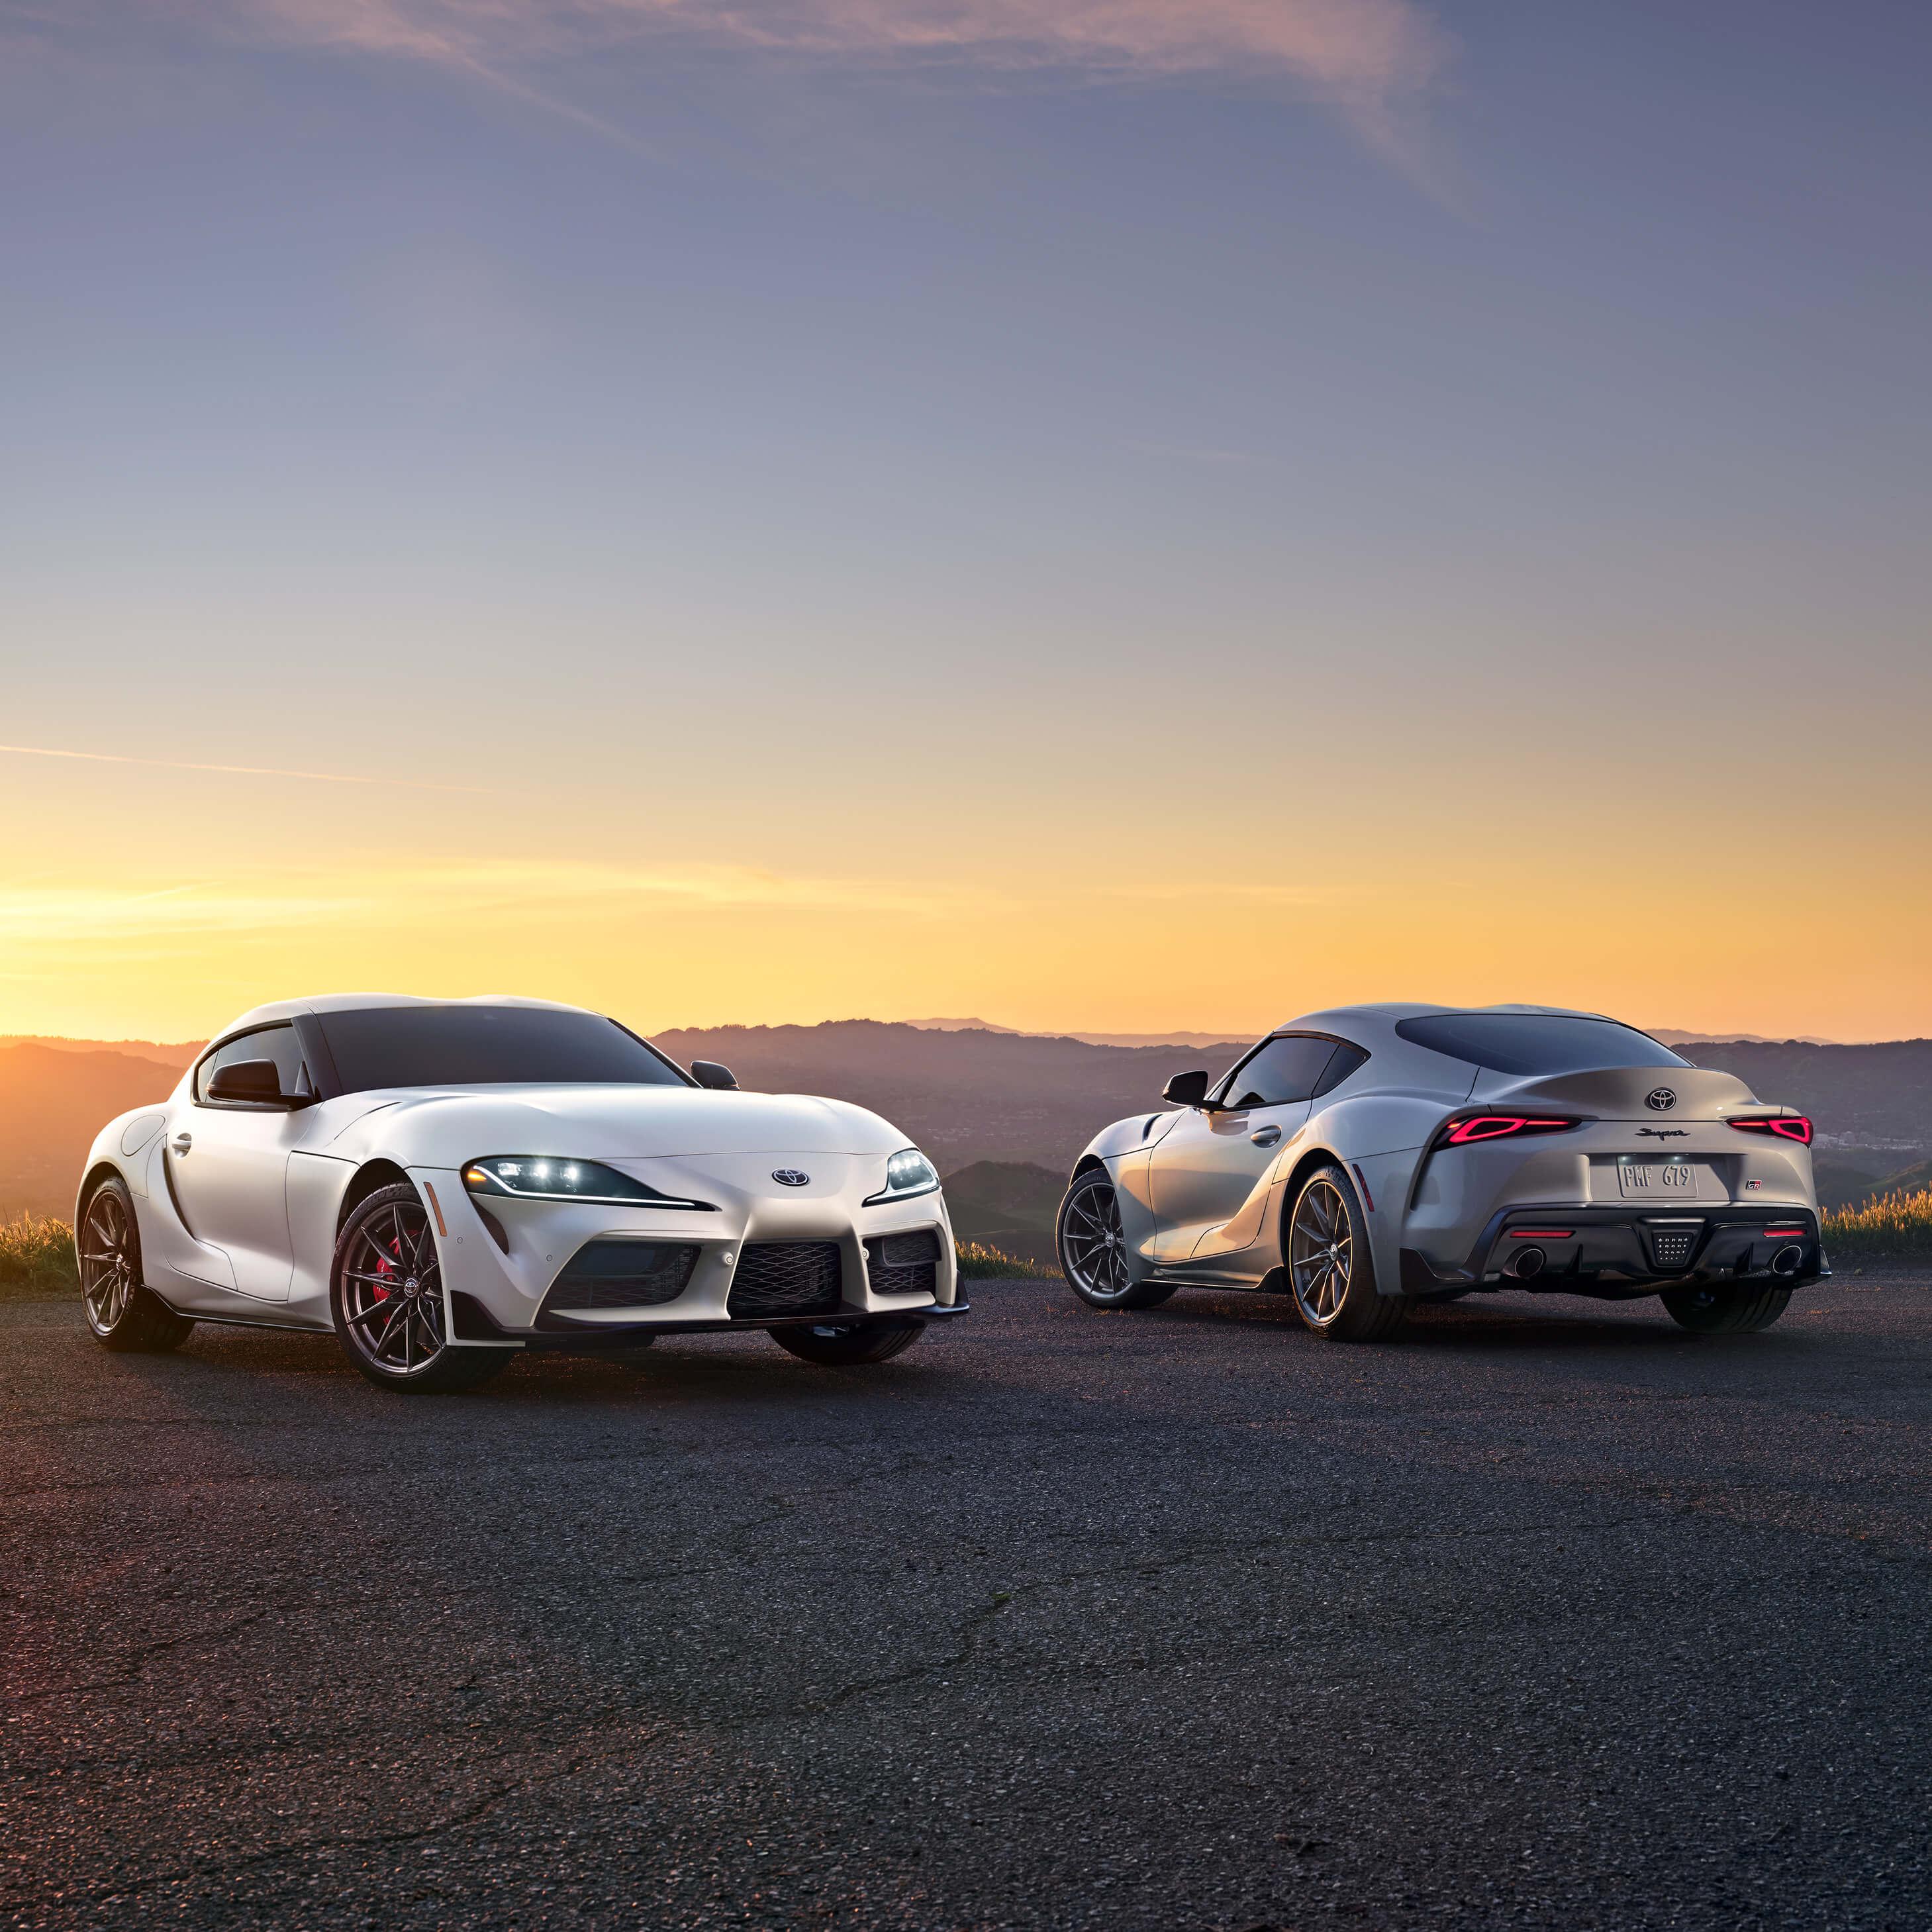 2 Toyota Supra sports cars parks on a hill overlooking a sunset on the mountains